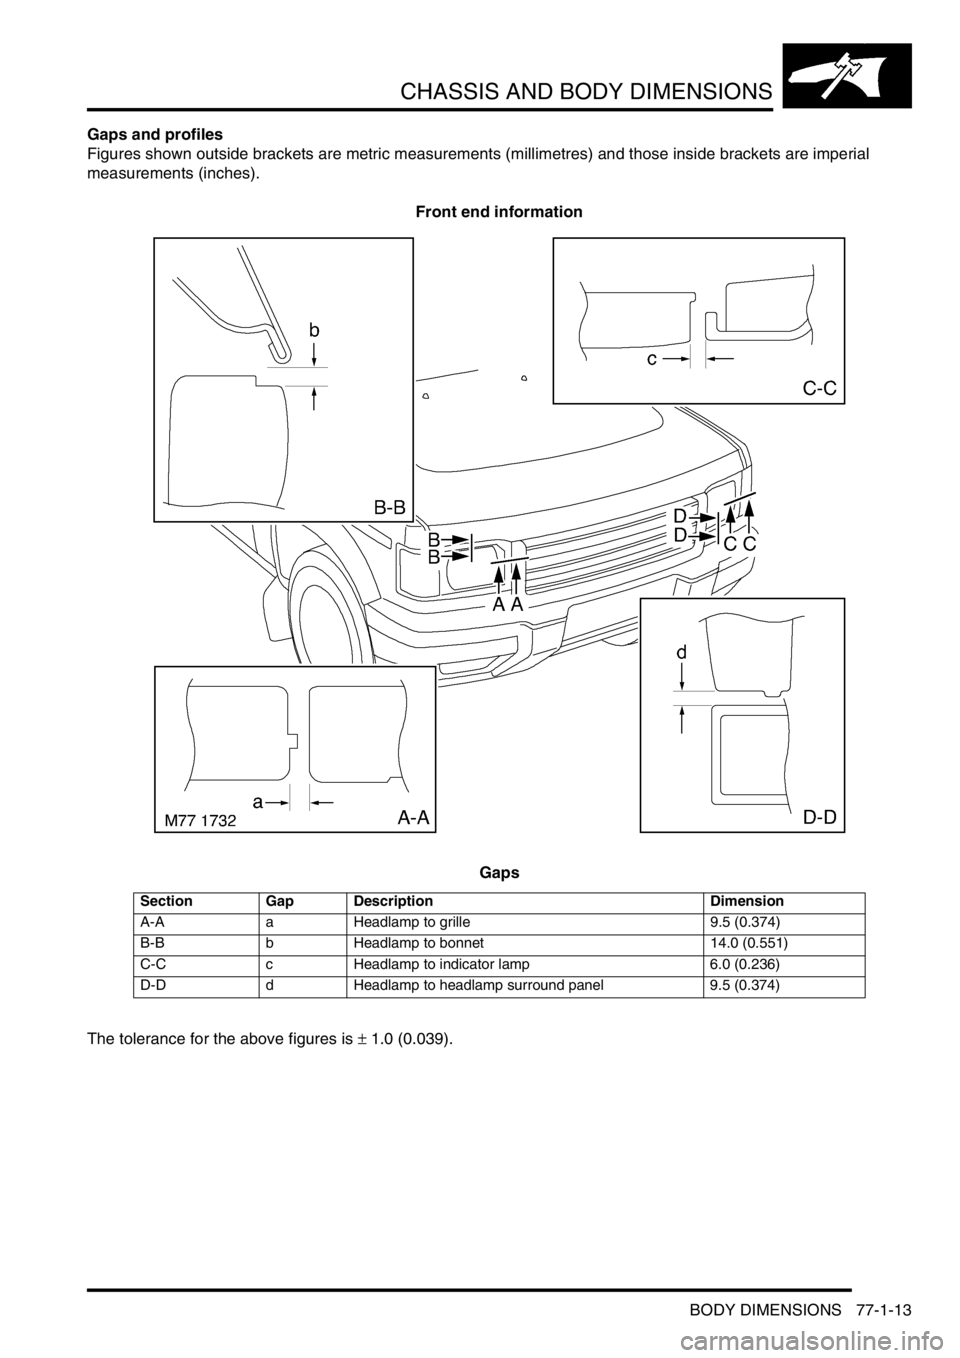 LAND ROVER DISCOVERY 2002 Owners Guide CHASSIS AND BODY DIMENSIONS
BODY DIMENSIONS 77-1-13
Gaps and profiles
Figures shown outside brackets are metric measurements (millimetres) and those inside brackets are imperial 
measurements (inches)